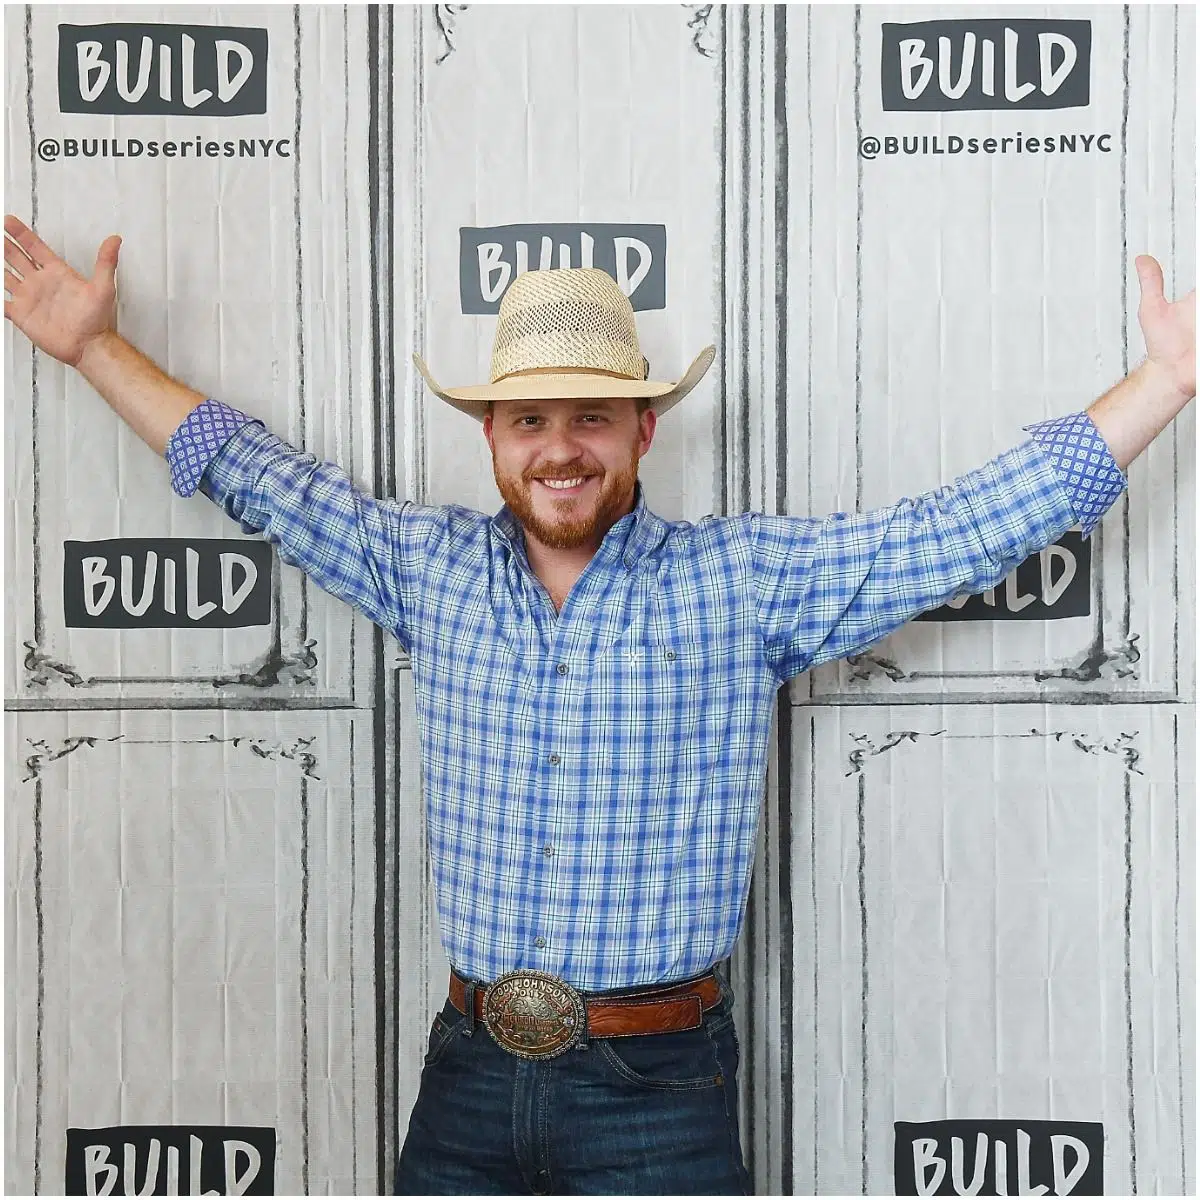 what is the net worth of Cody Johnson